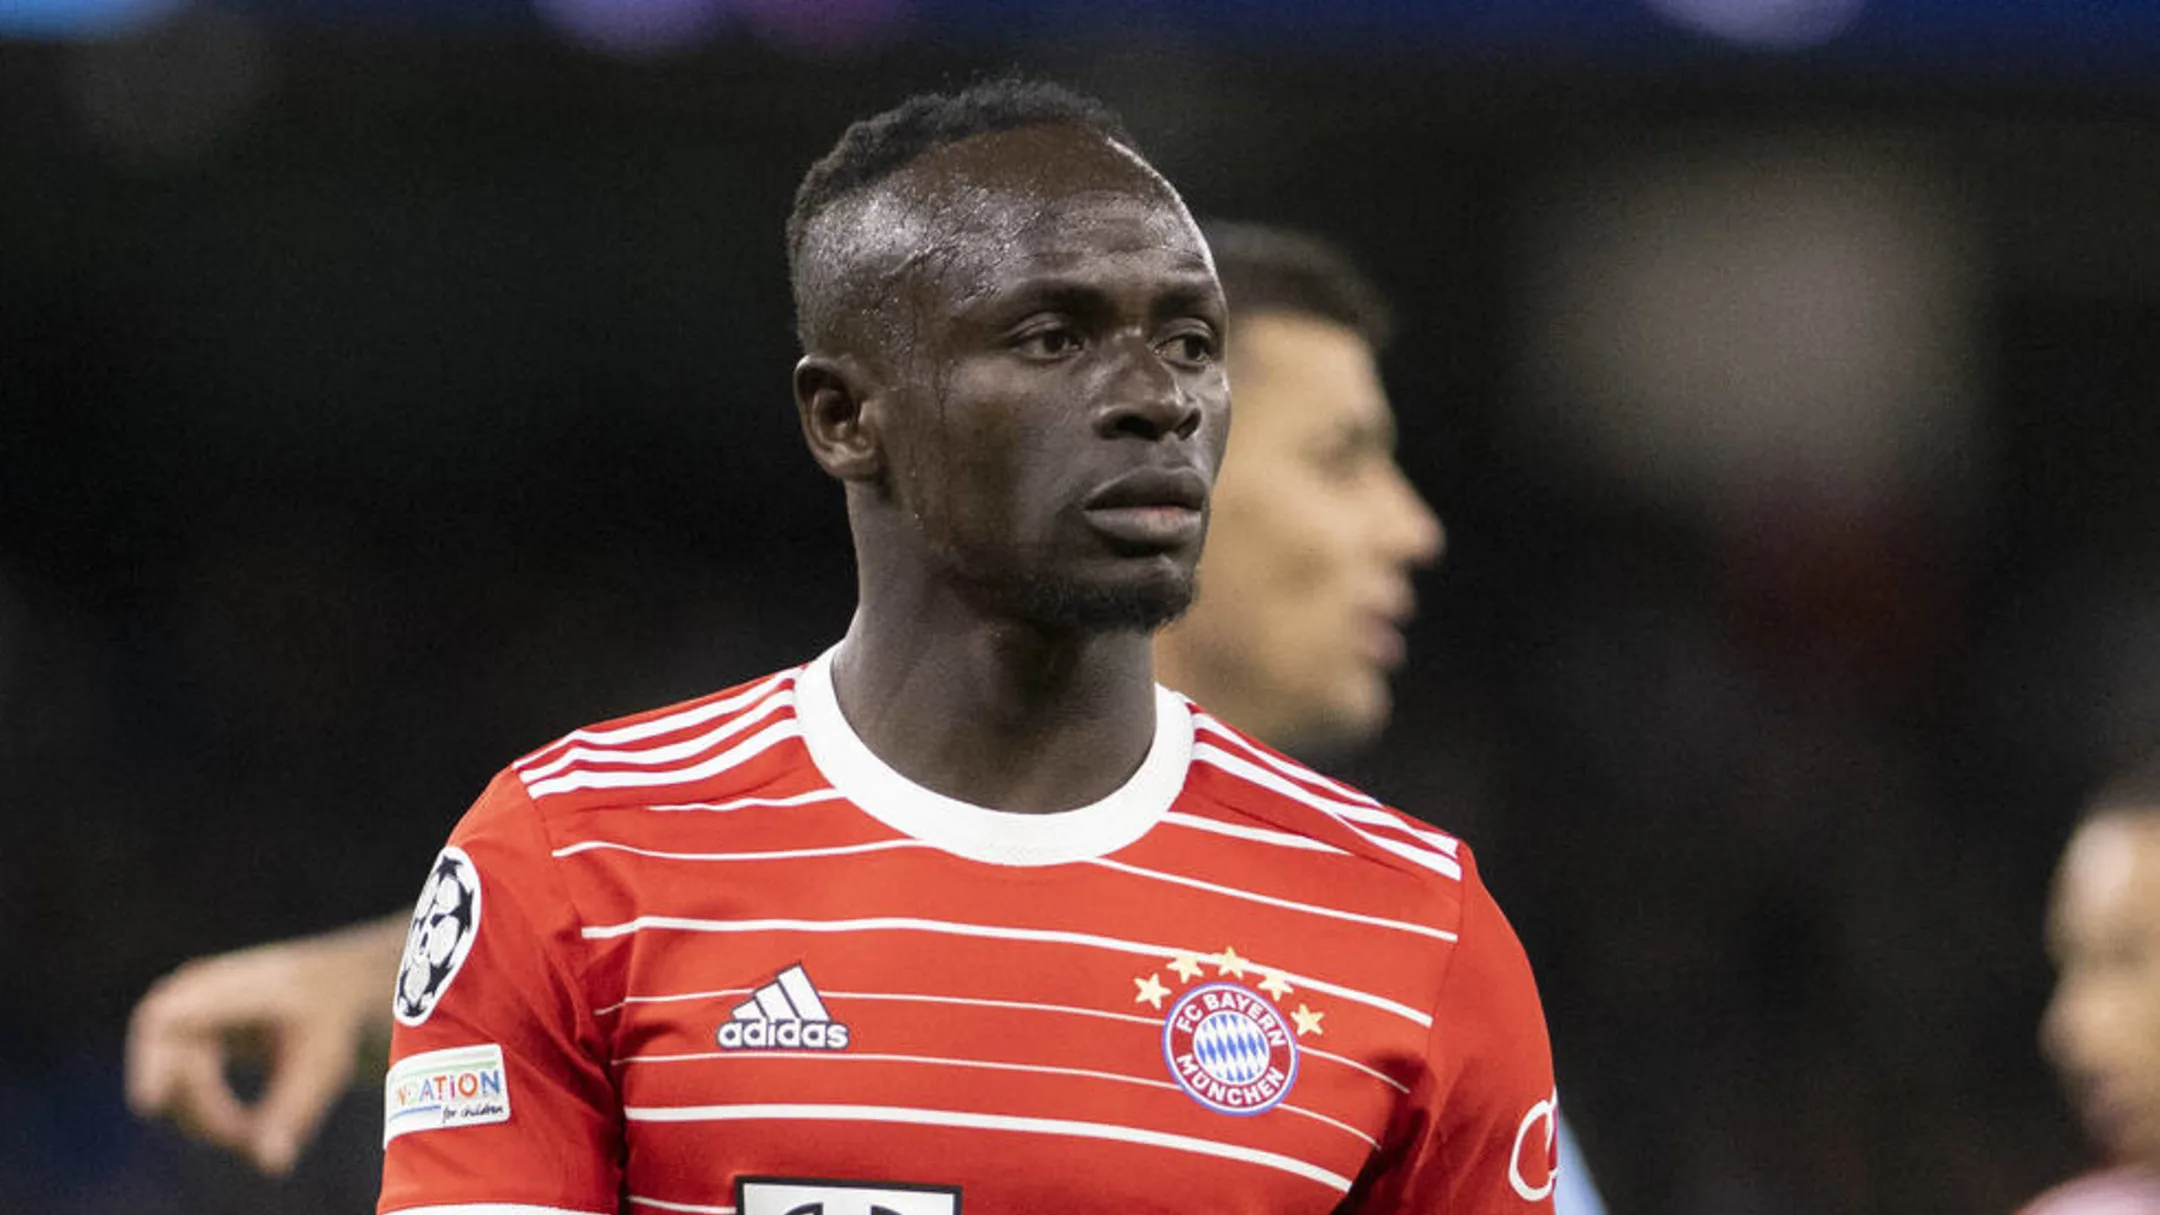 Bayern Munich will 'try everything' to sell Sadio Mane this summer